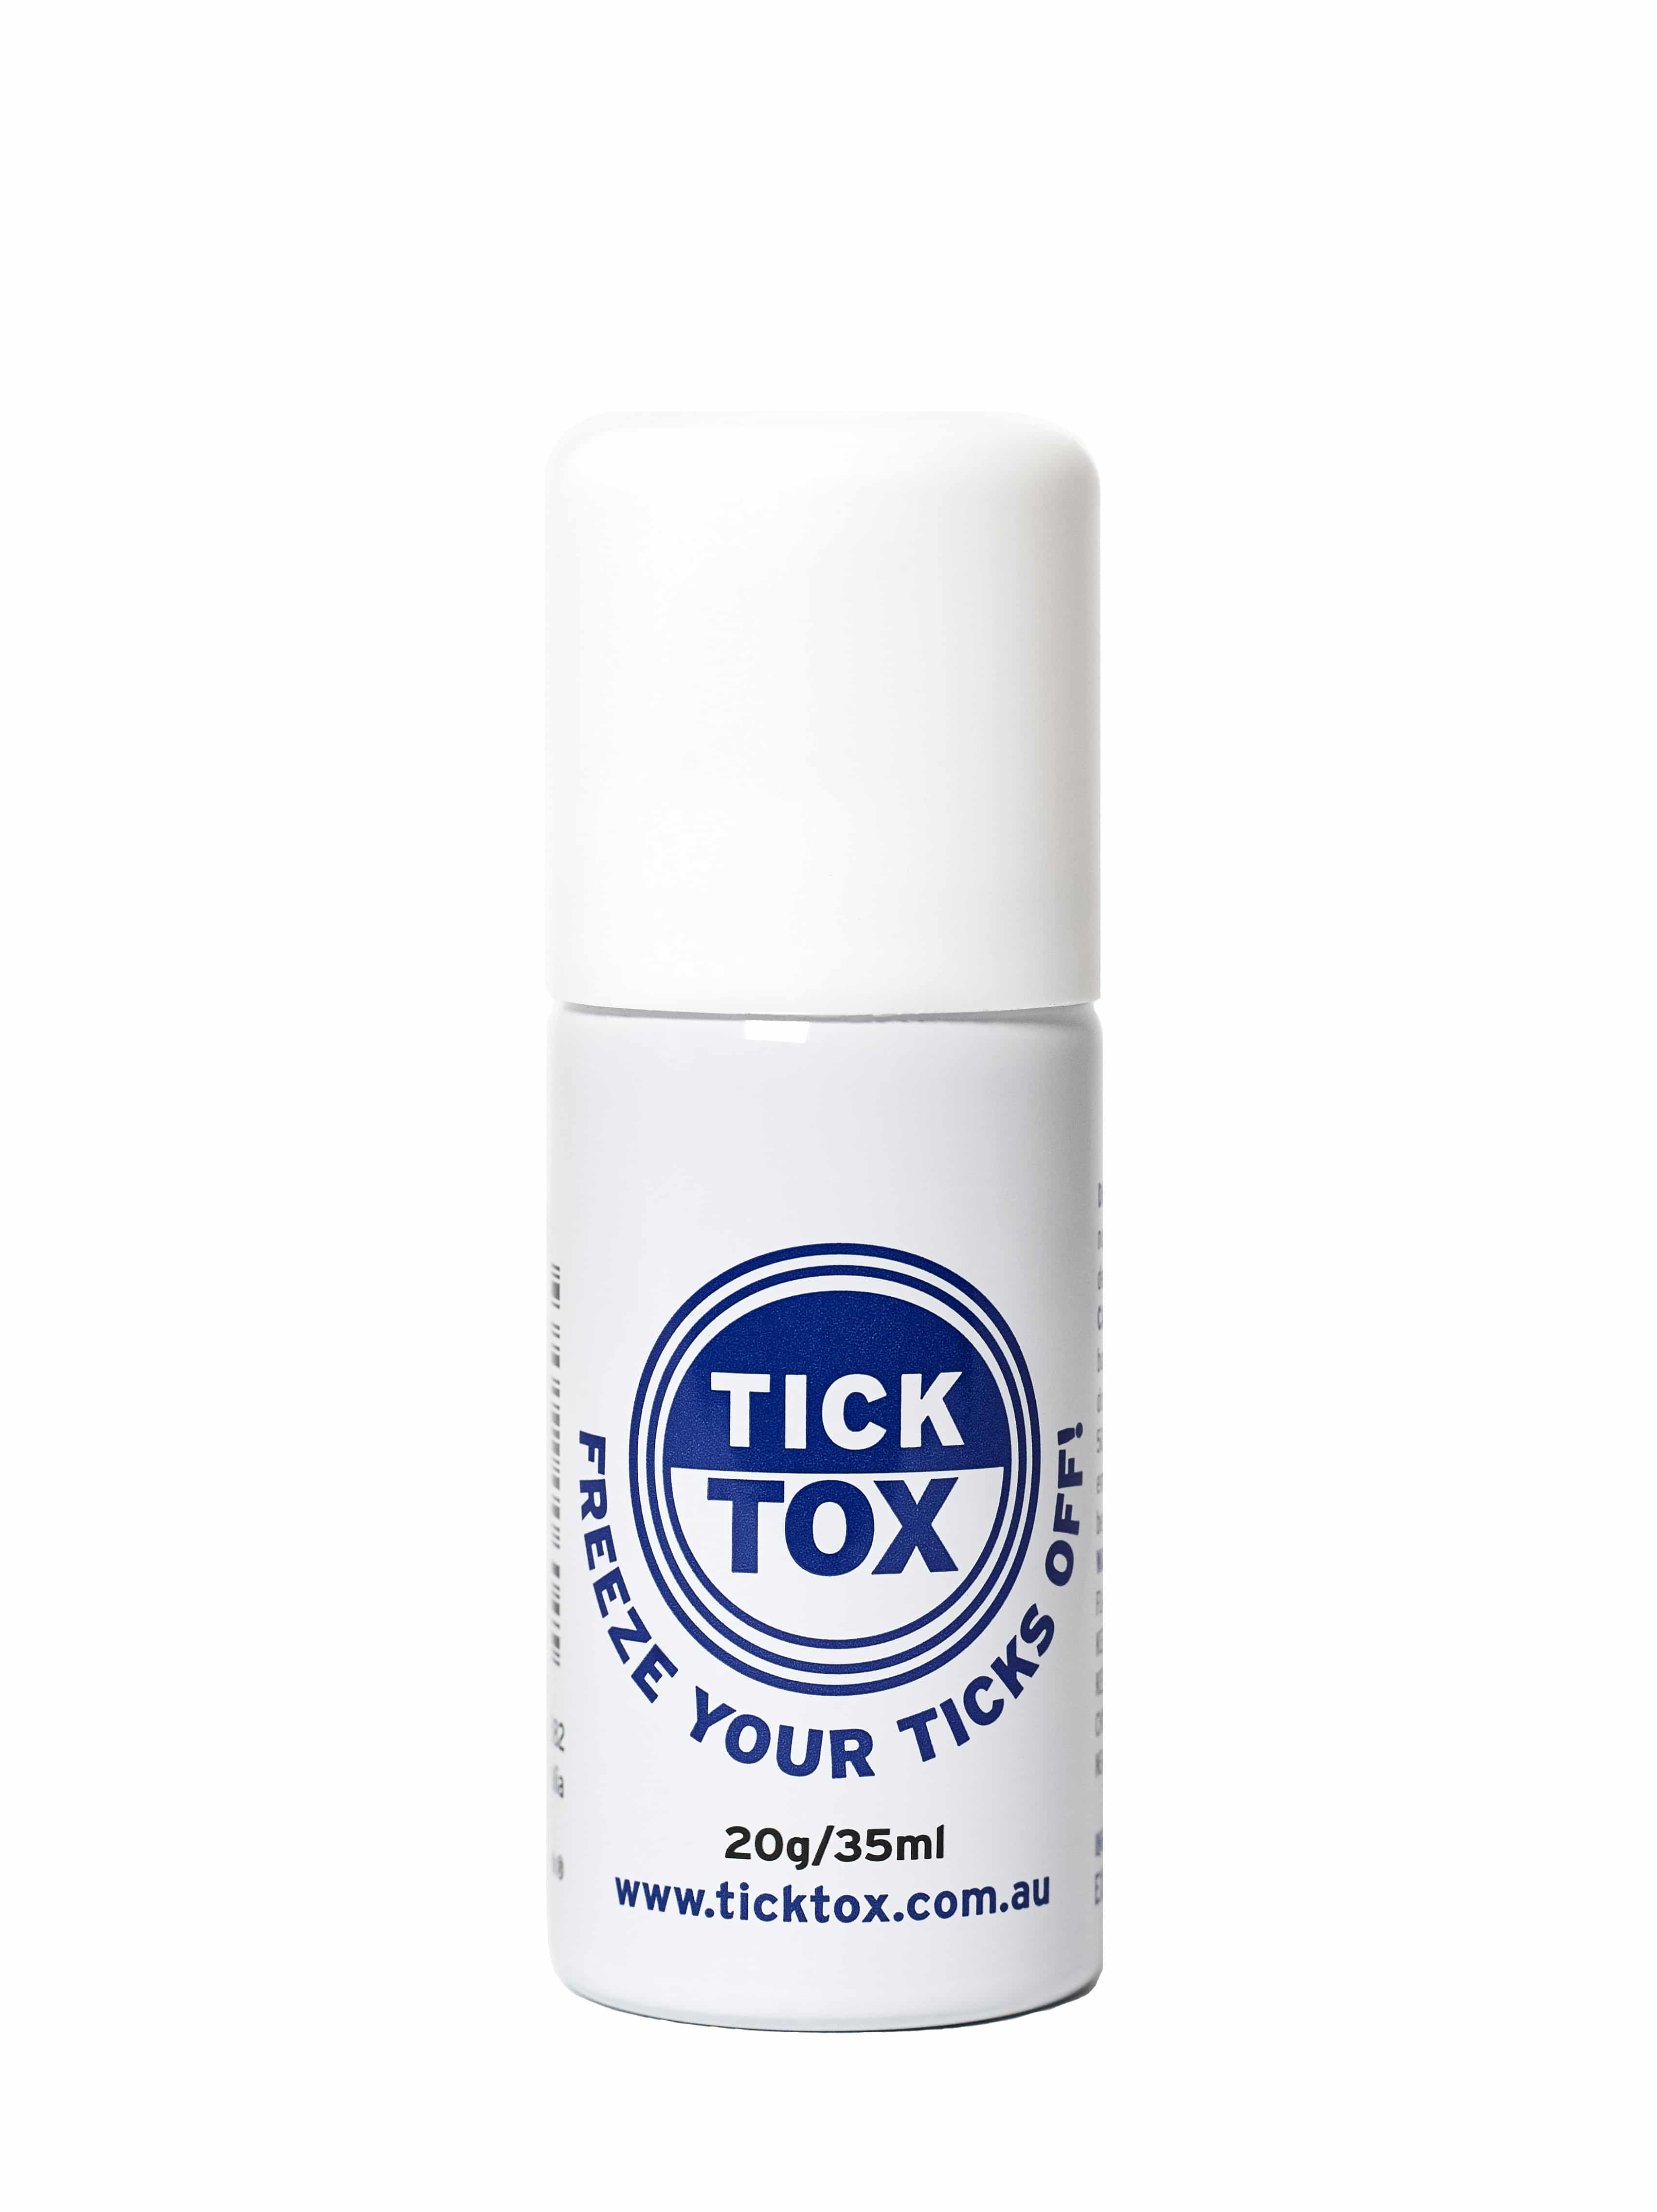 TICKTOX_PRODUCT_NEW_LABEL_PRODUCT_007_FINAL_WHITE.jpg